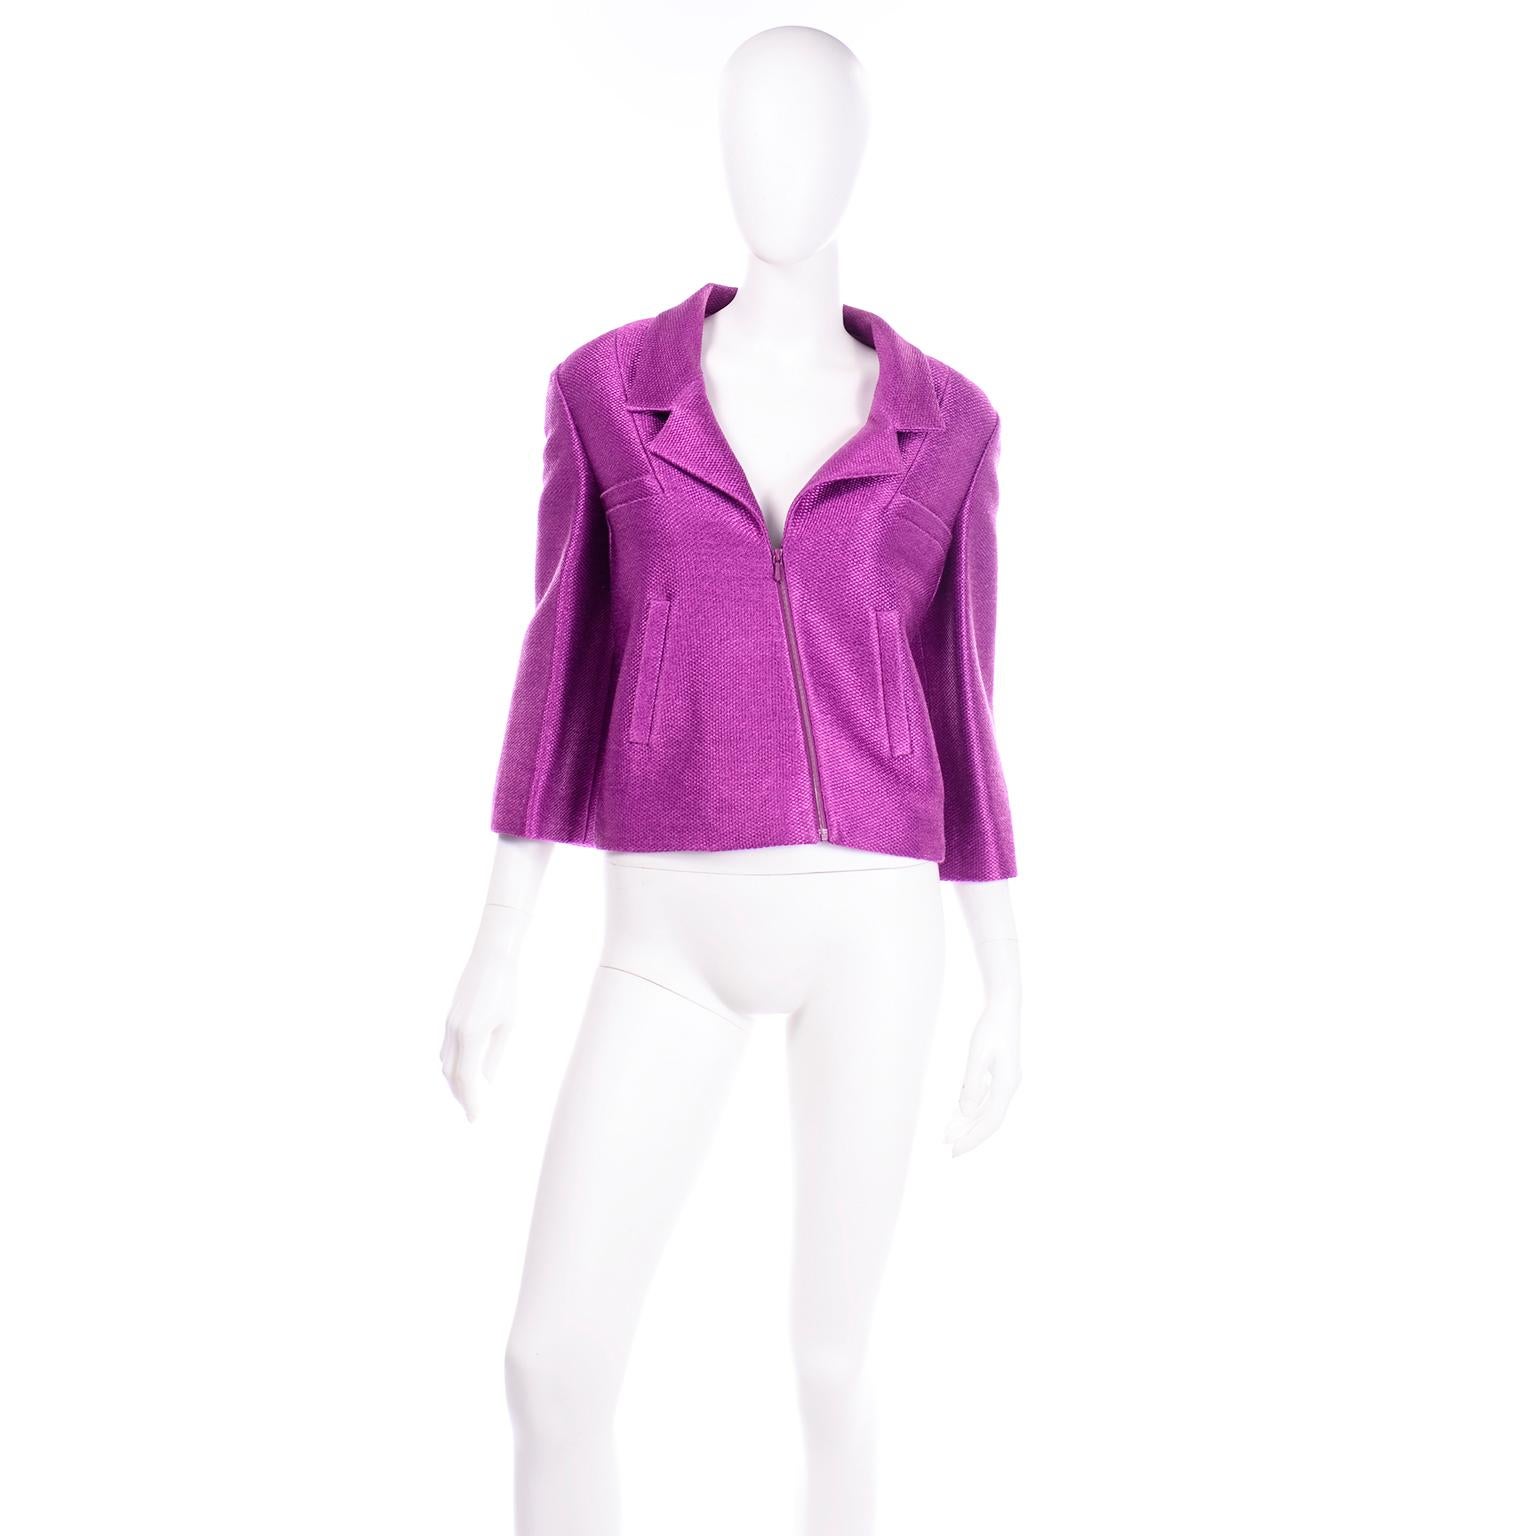 This incredible S/S 2001 vintage Chanel jacket is made from a woven magenta purple cotton blend fabric with a metallic sheen. The jacket and sleeves are slightly cropped and there is a front zipper that is asymmetrical on the bodice. The jacket has